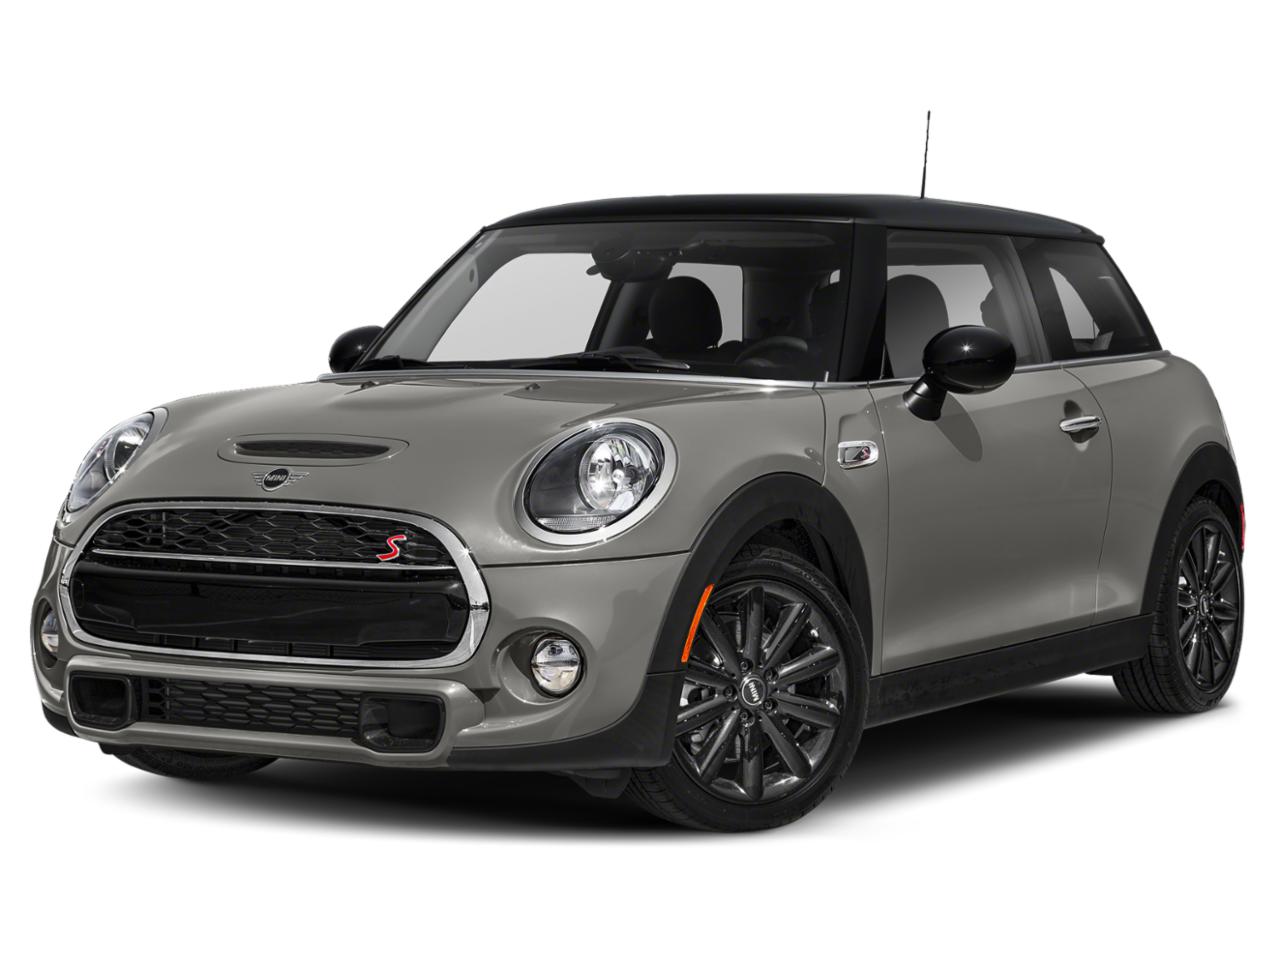 Melting Silver Metallic 2020 MINI Cooper S Hardtop Iconic for Sale at